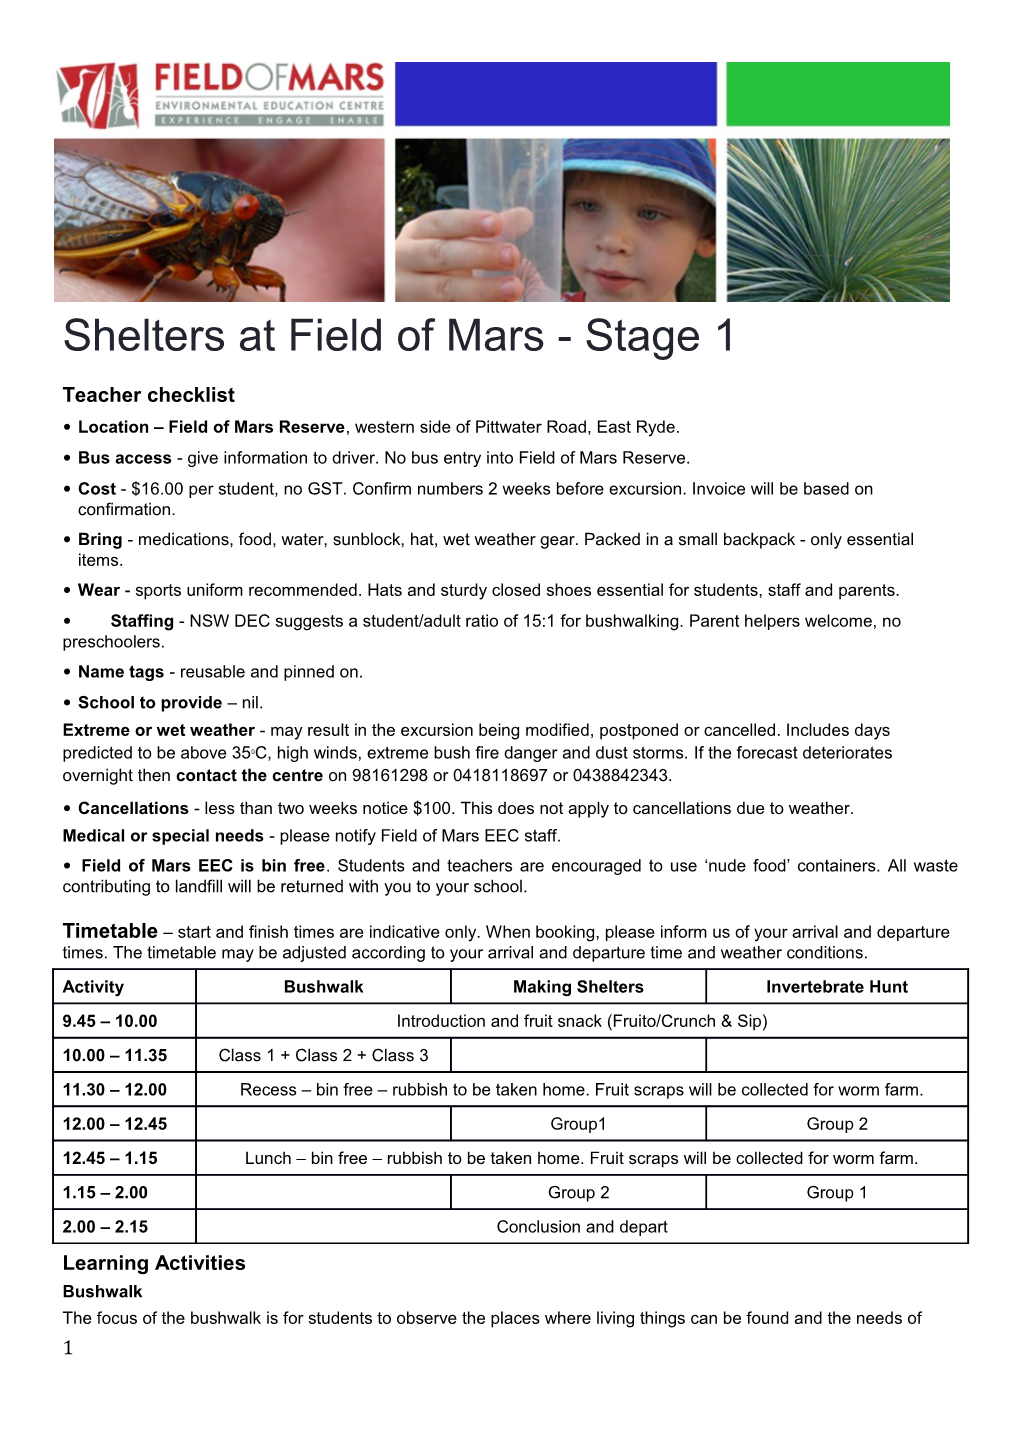 Shelters at Field of Mars - Stage 1